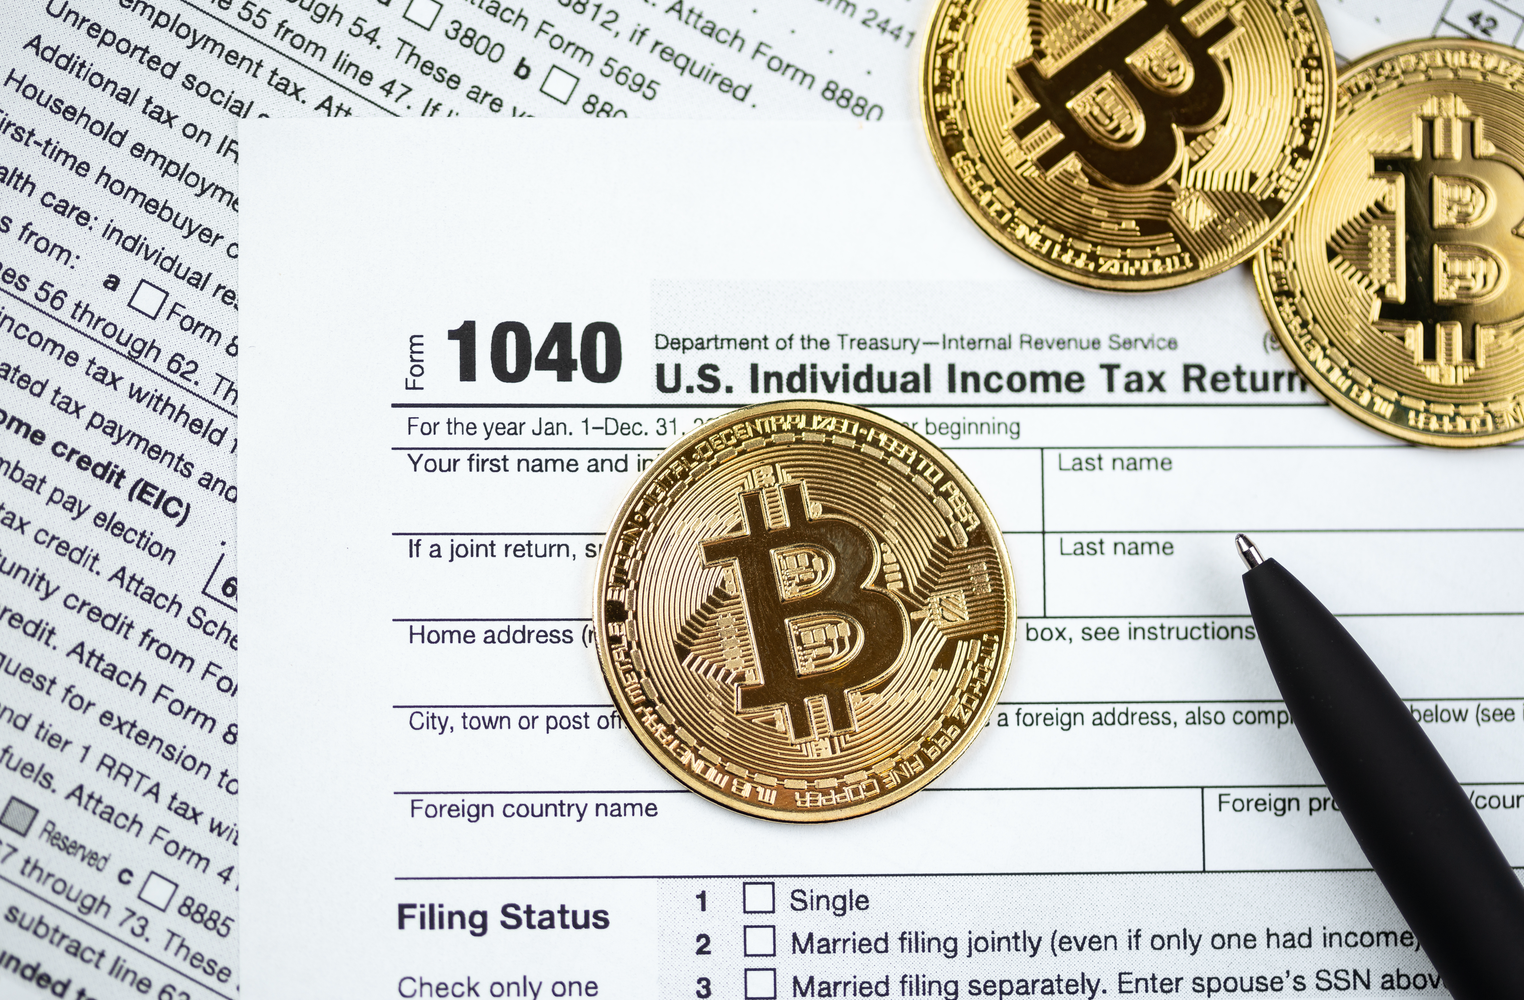 No Hiding Behind Virtual Currency, IRS Insists -- And Court Agrees